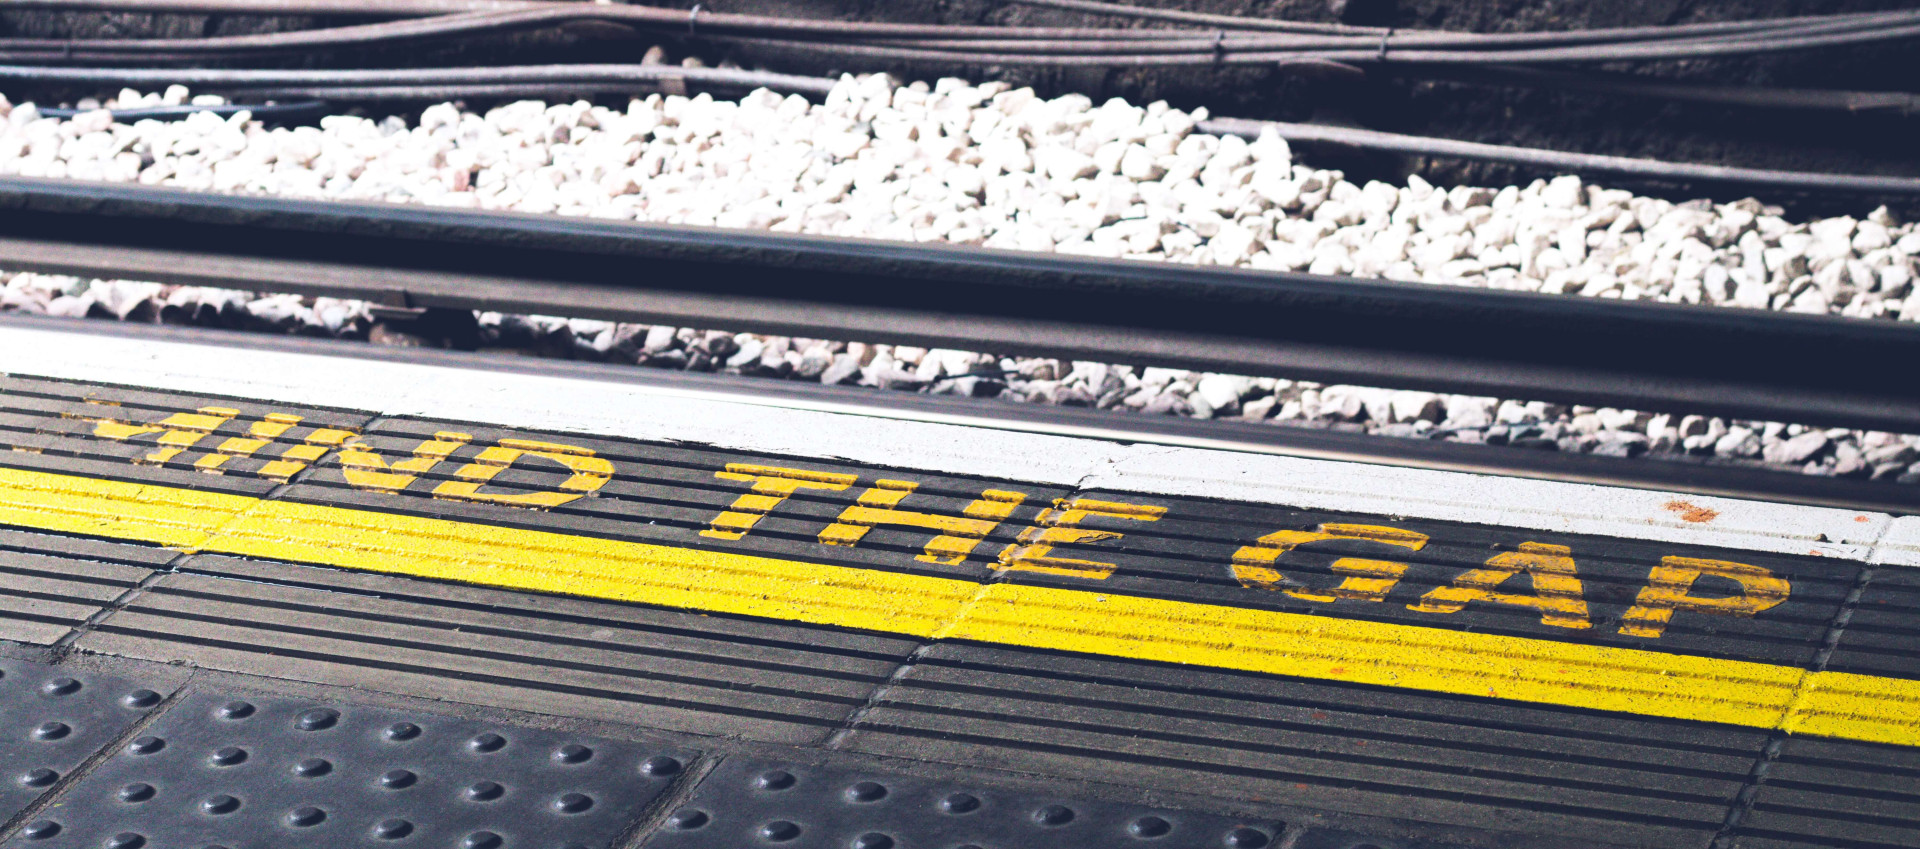 the word "mind the gap" in yellow writing on the floor with electric train wiring in the background